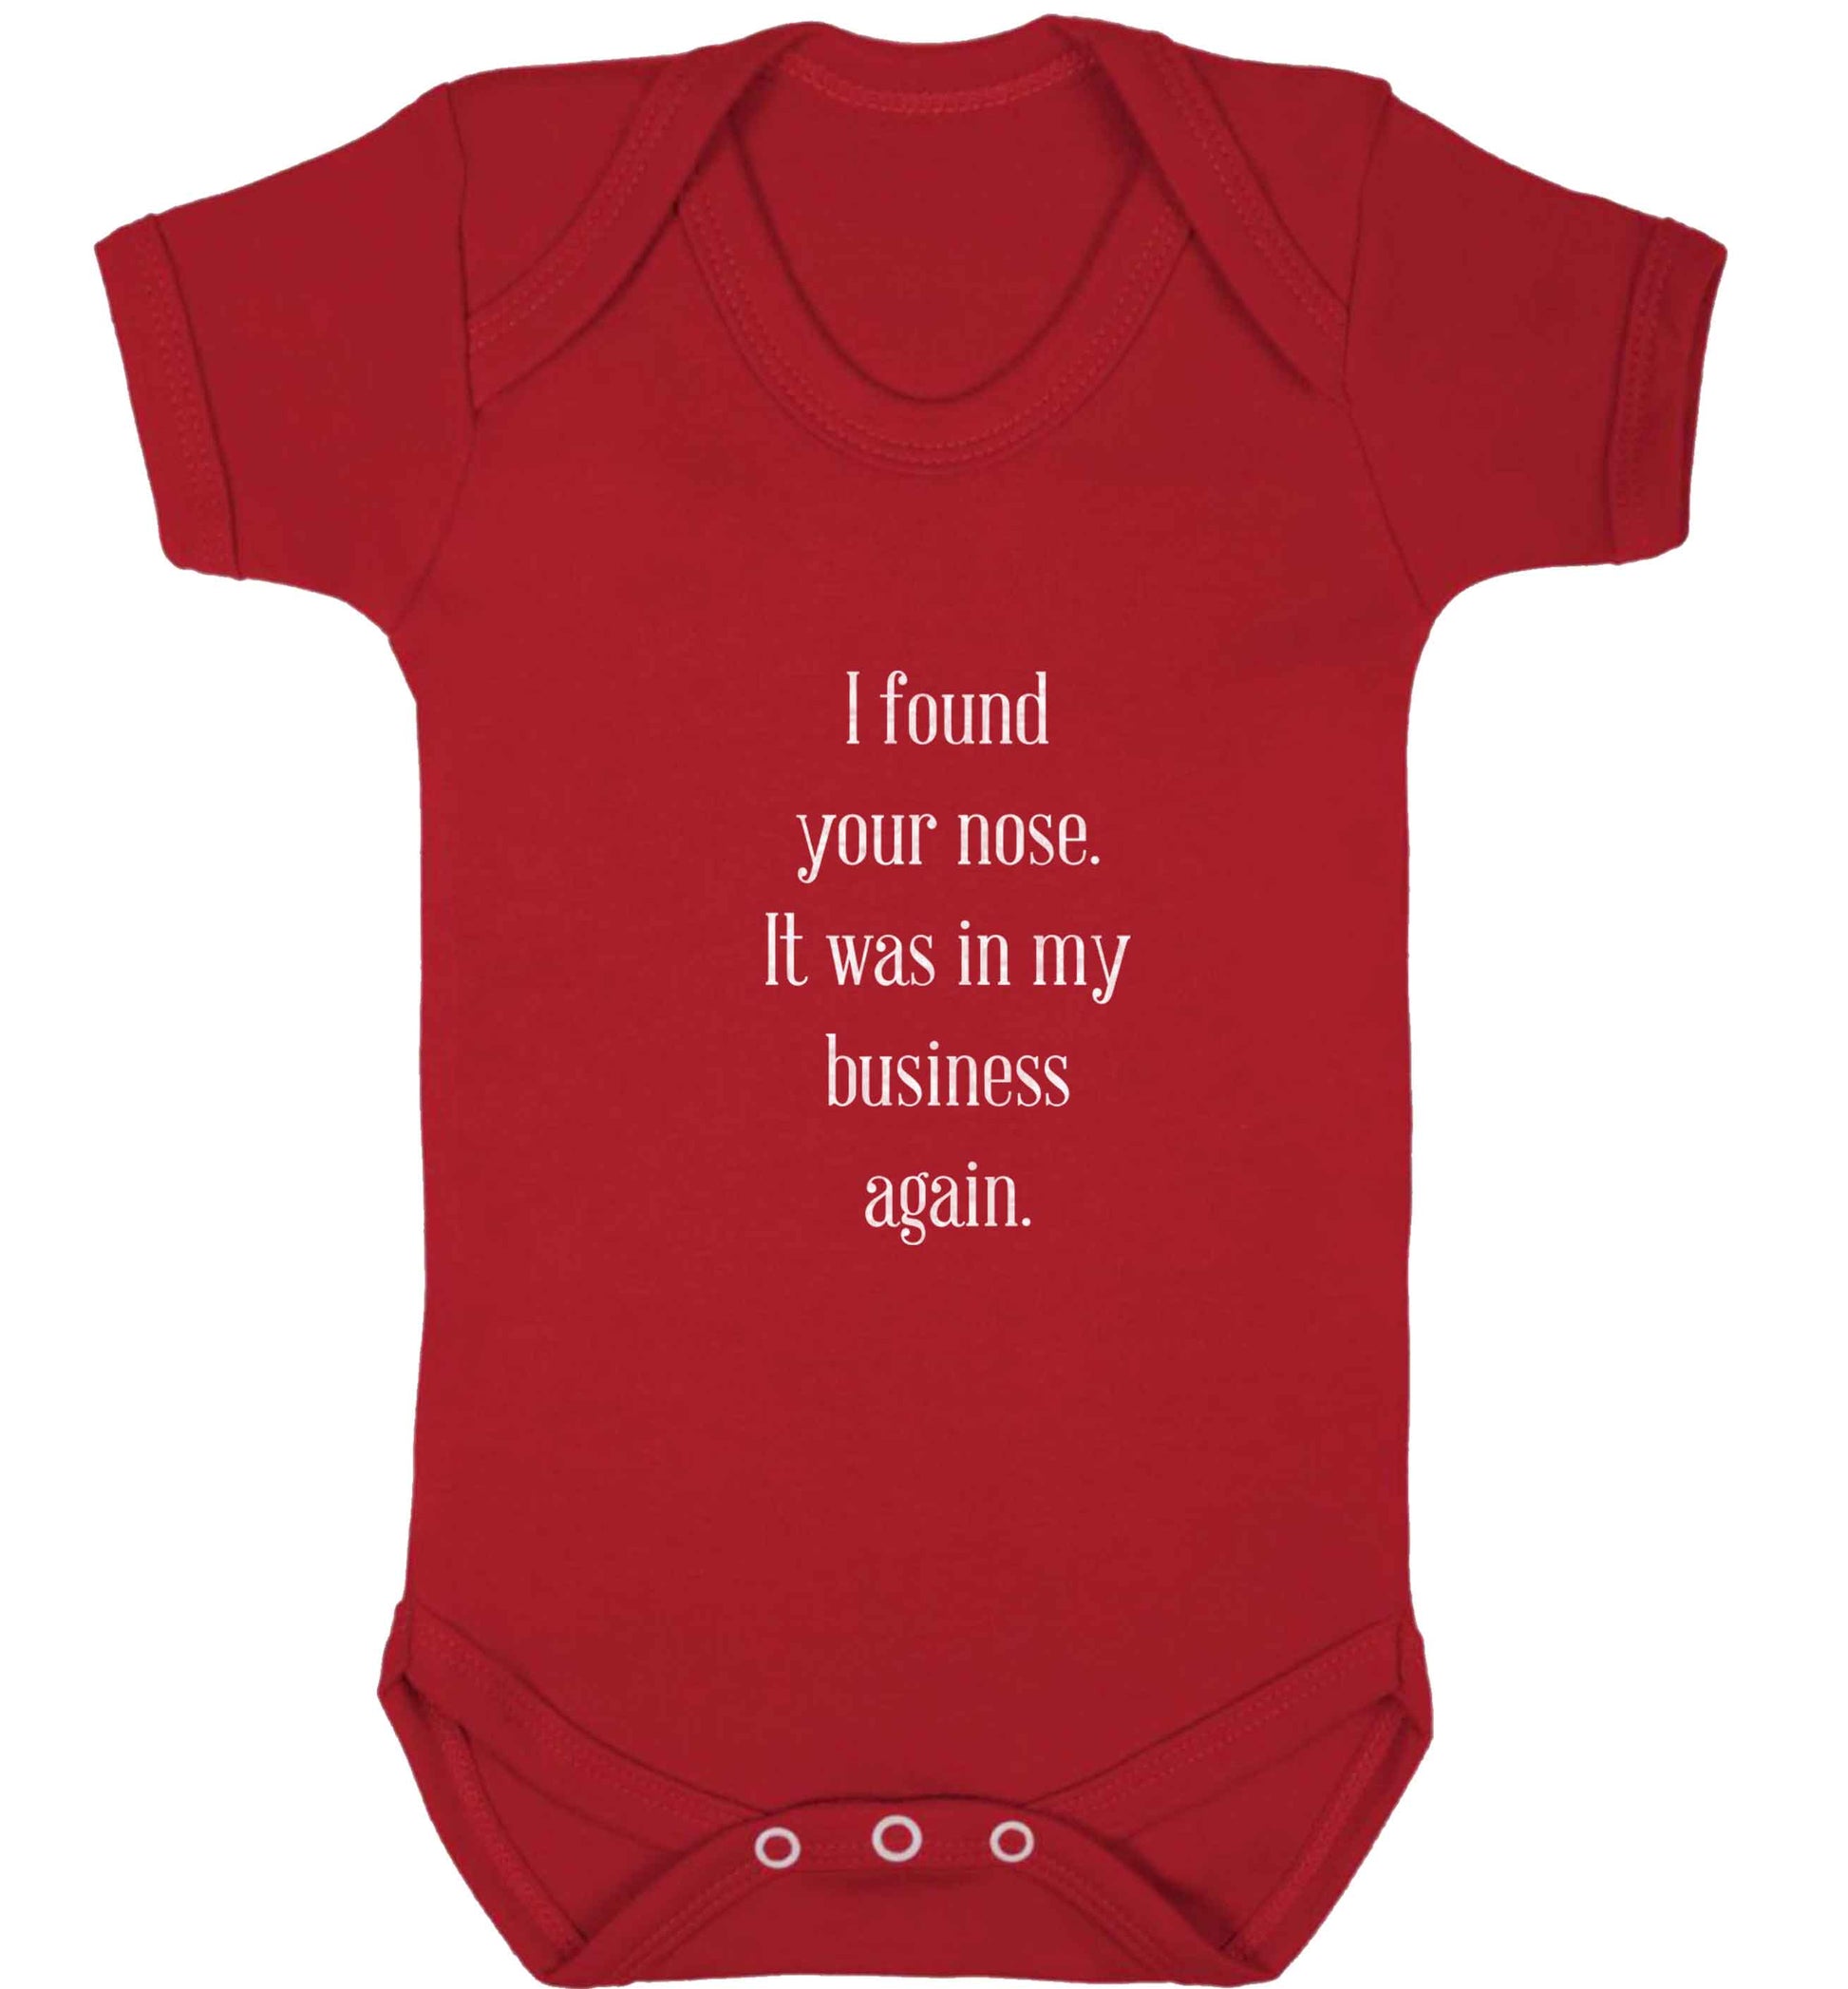 I found your nose it was in my business again baby vest red 18-24 months